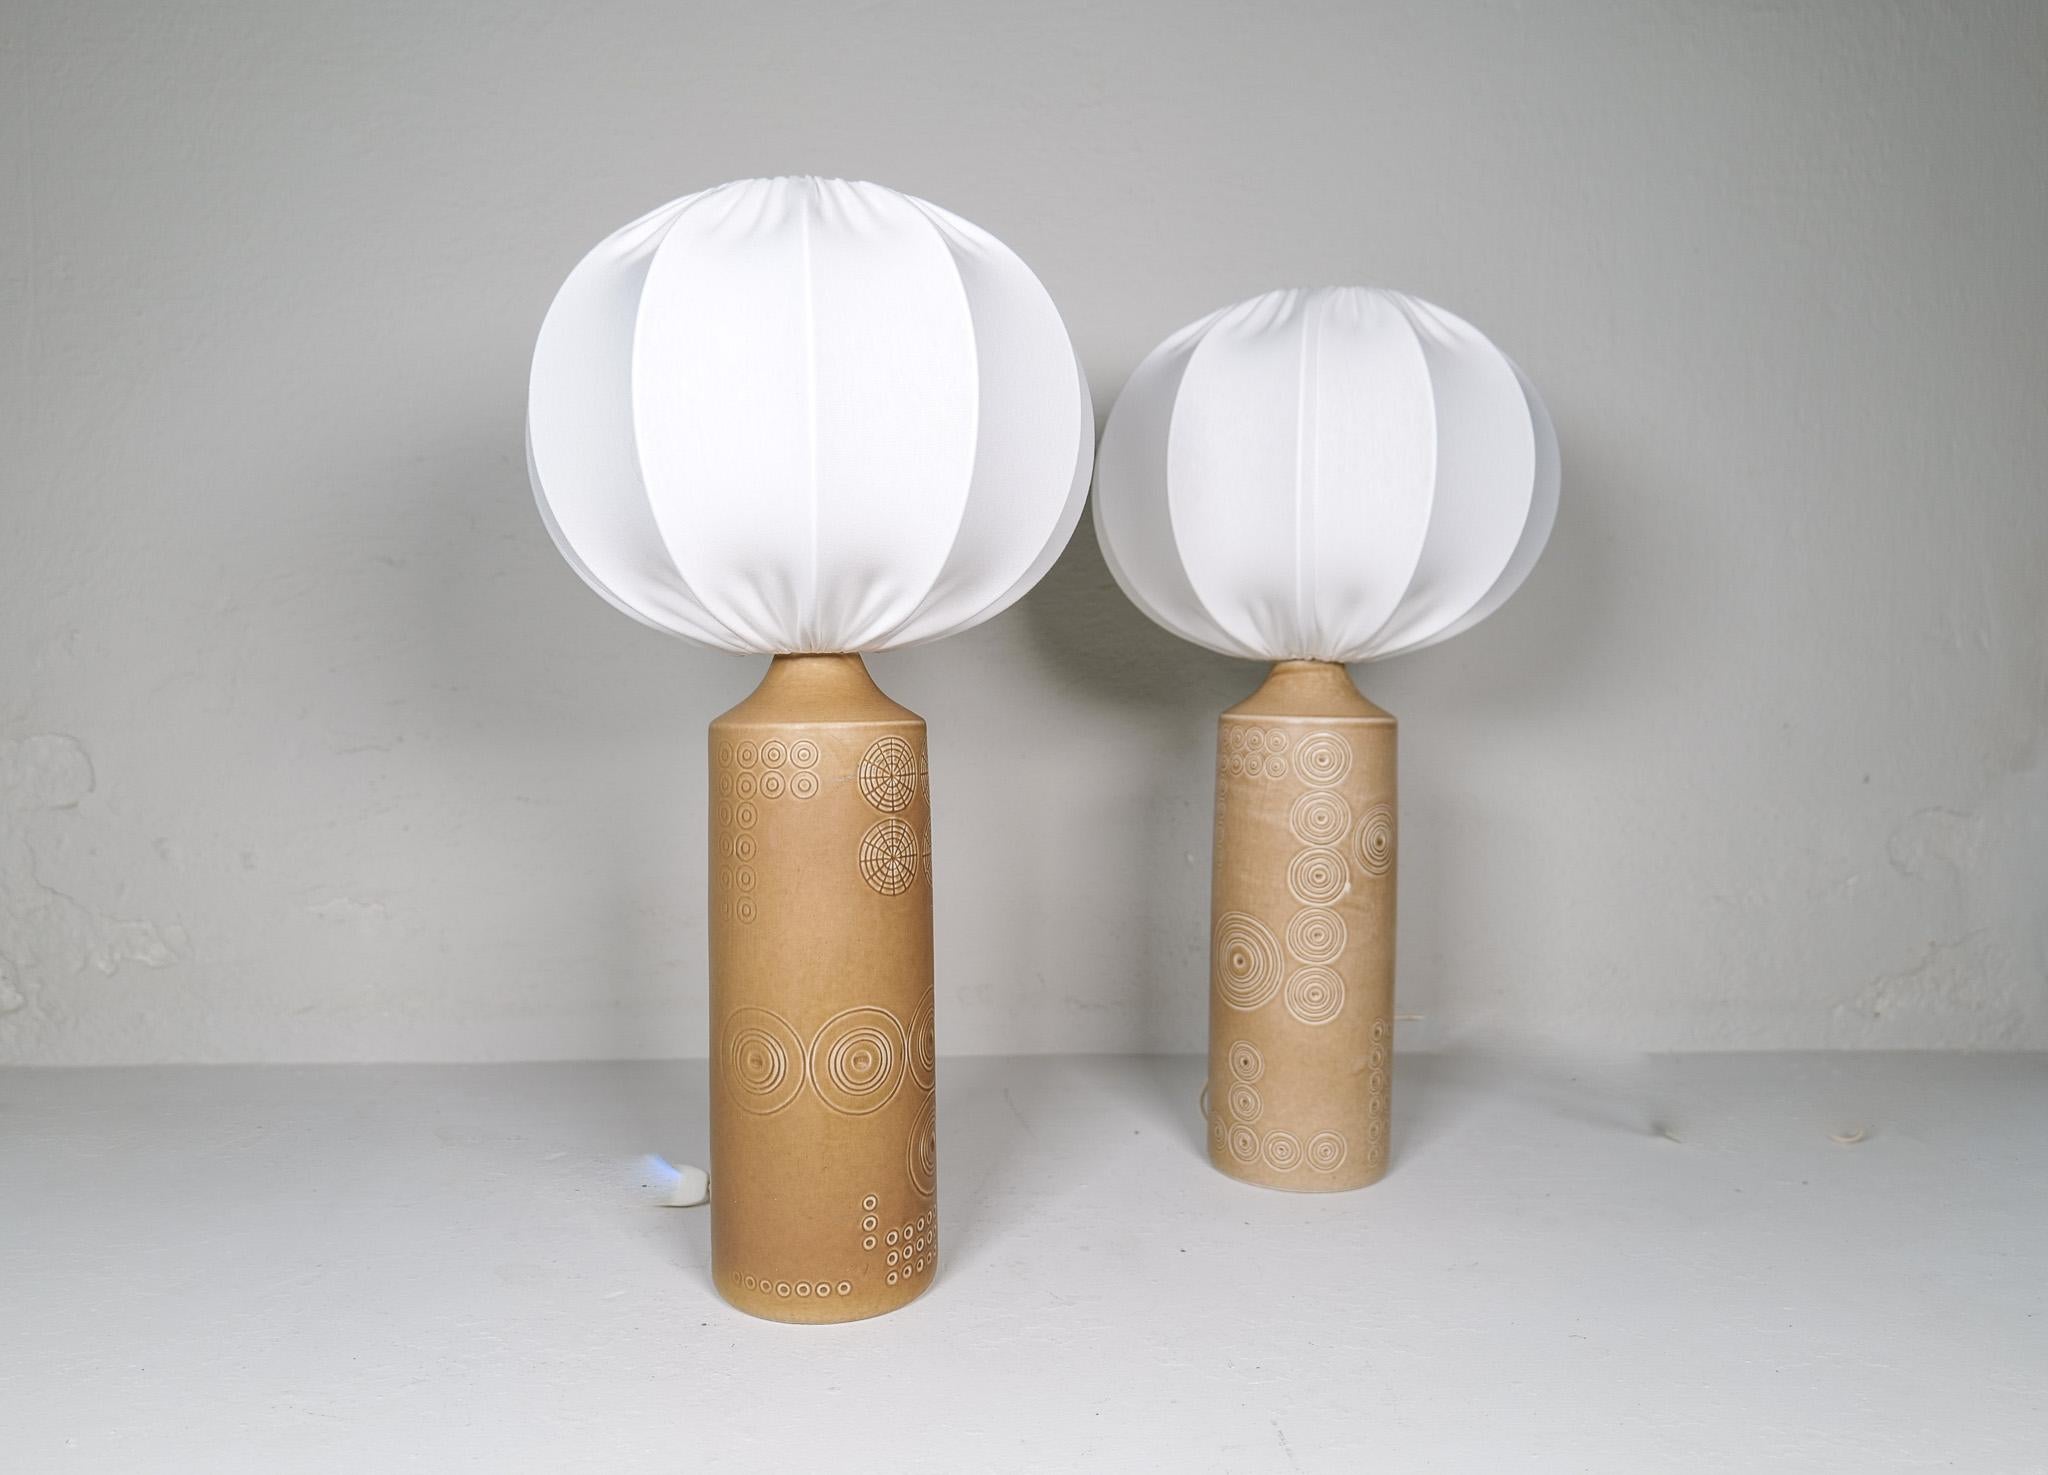 
Pair of rare porcelain lamps with an incised abstracted circular pattern, designed by Olle Alberius for Rorstrand. The Sarek pattern was inspired from the most northern national park in Sweden with the name Sarek. 

Good vintage condition, one